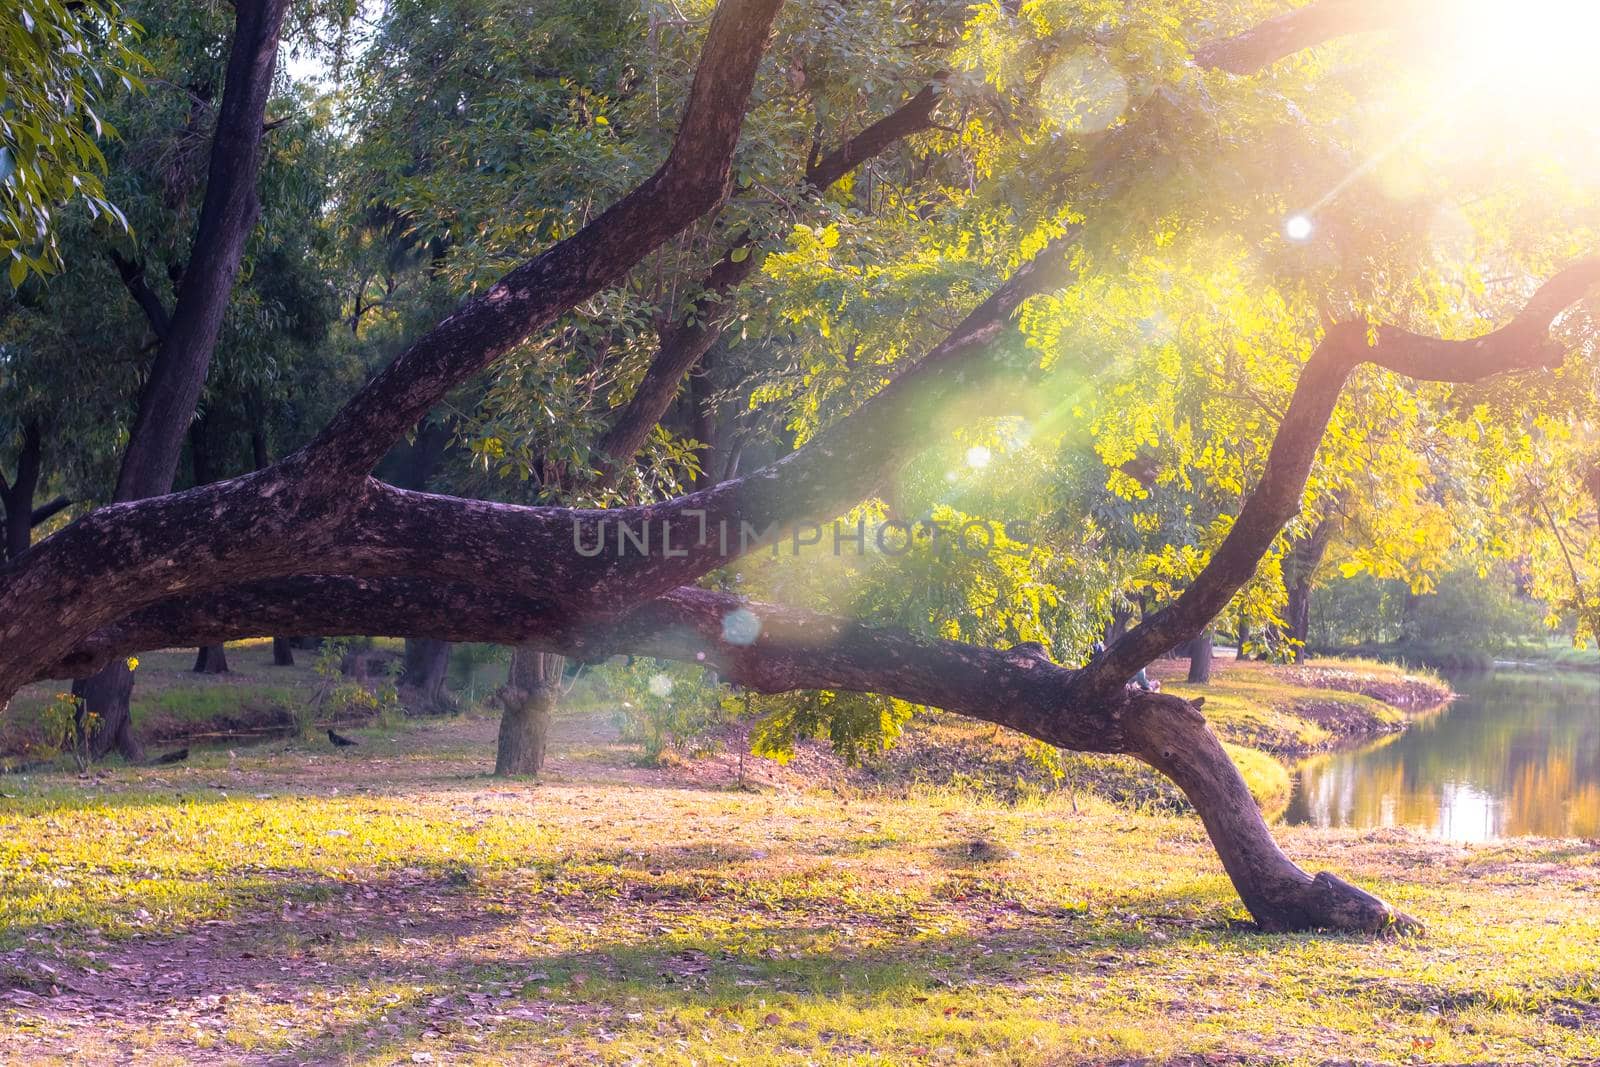 Sun rays shine through branches of trees by Petrichor